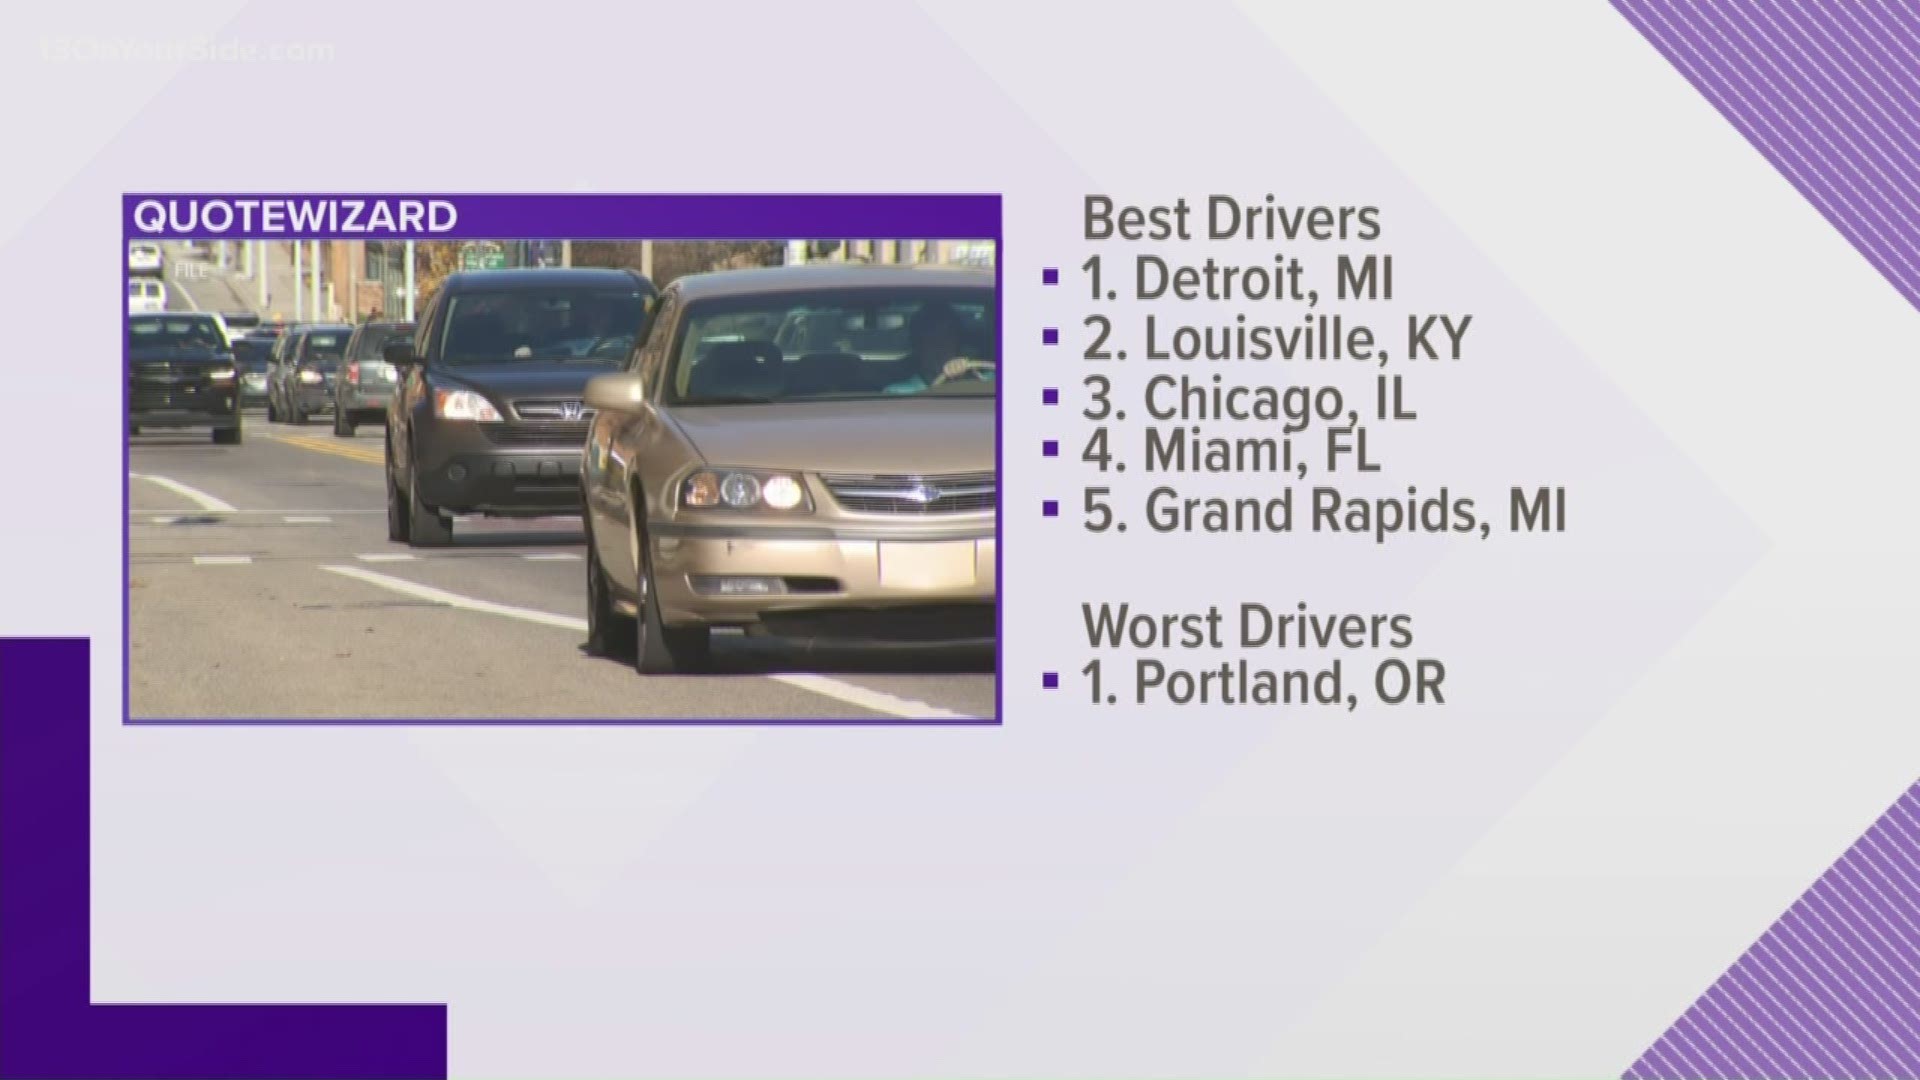 QuoteWizard said Detroit has the No. 1 best drivers in the county, and Grand Rapids is ranked No. 5.